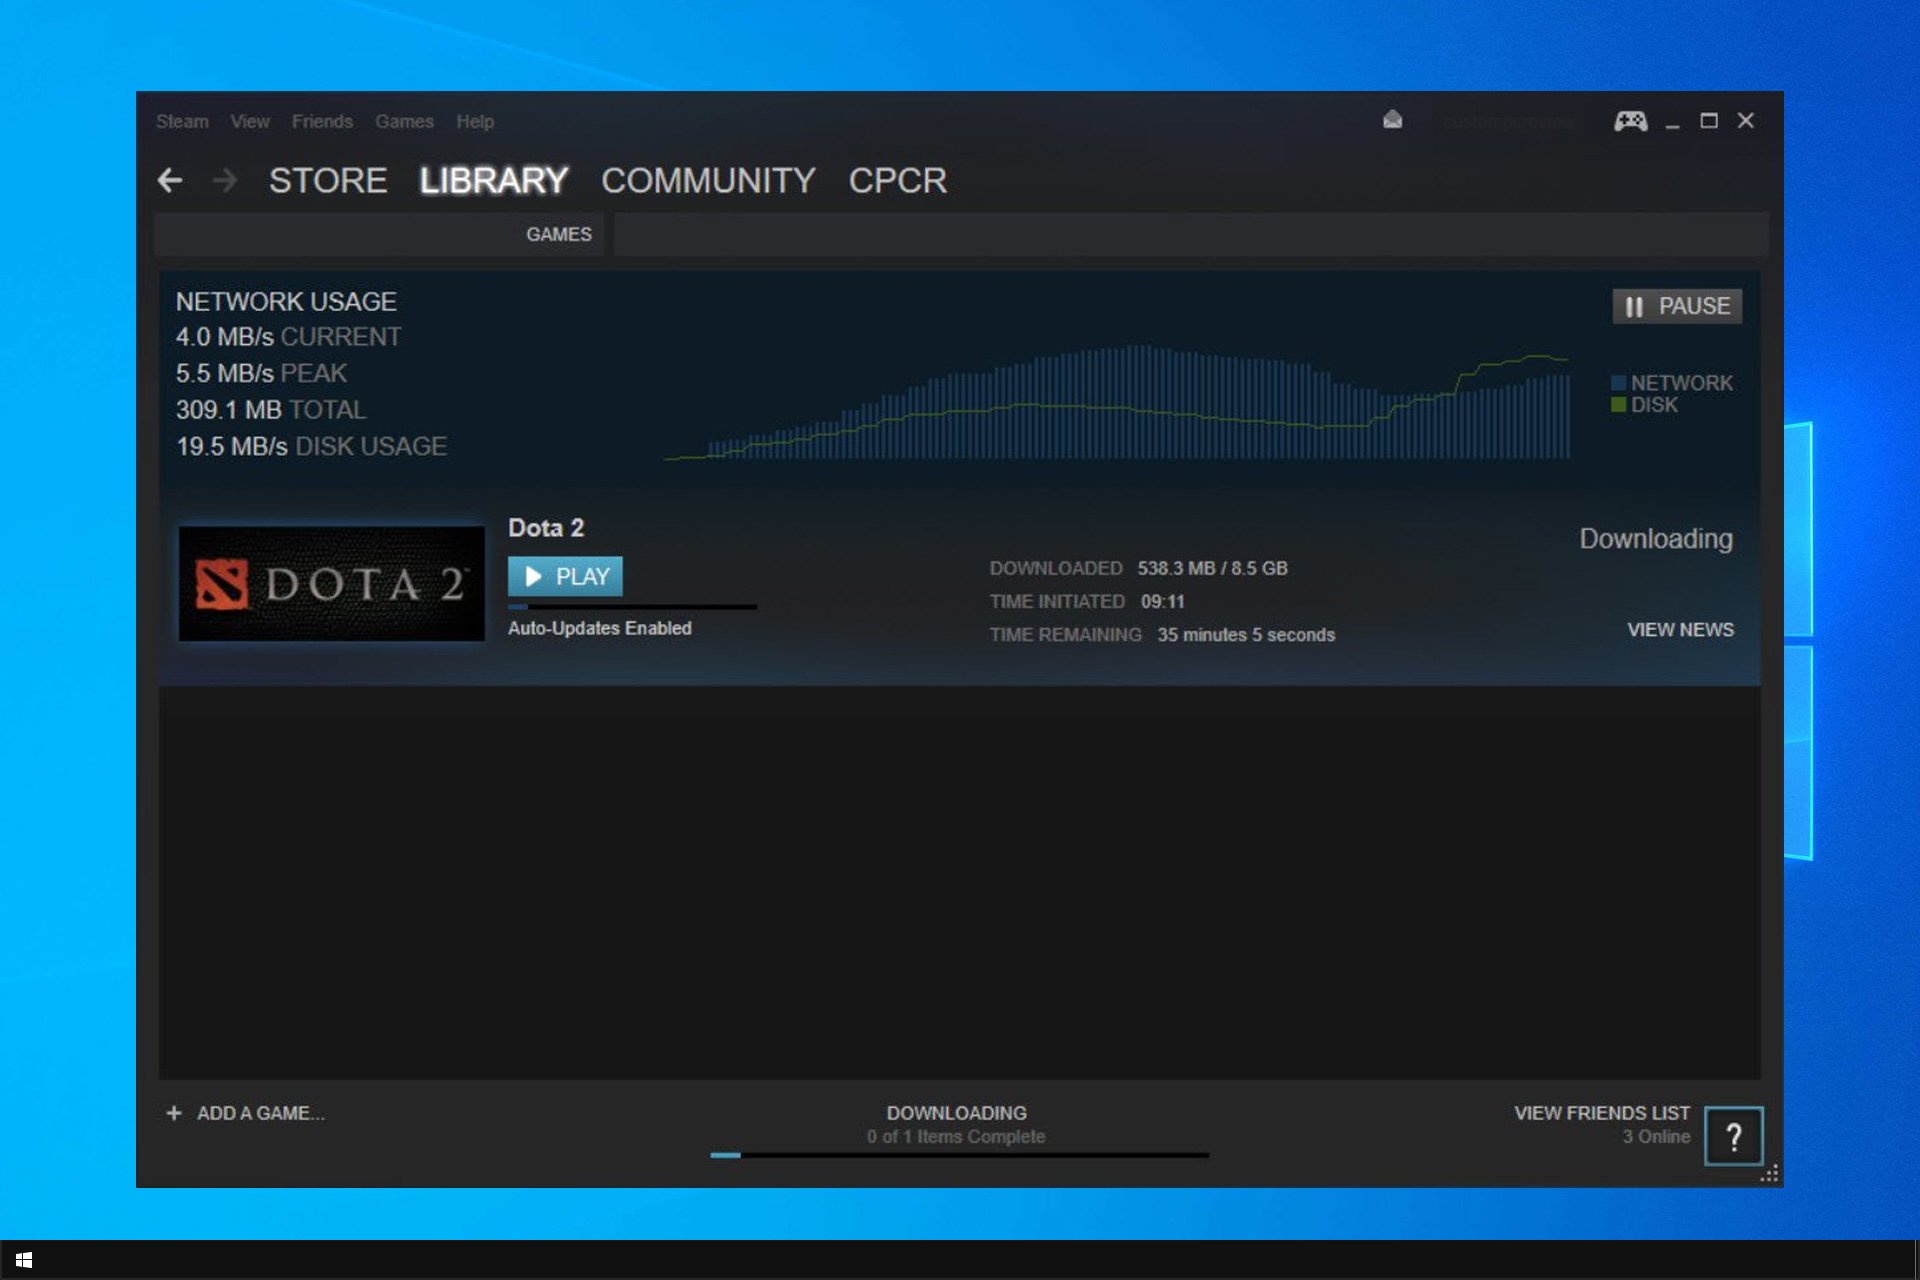 How to speed up Steam downloads